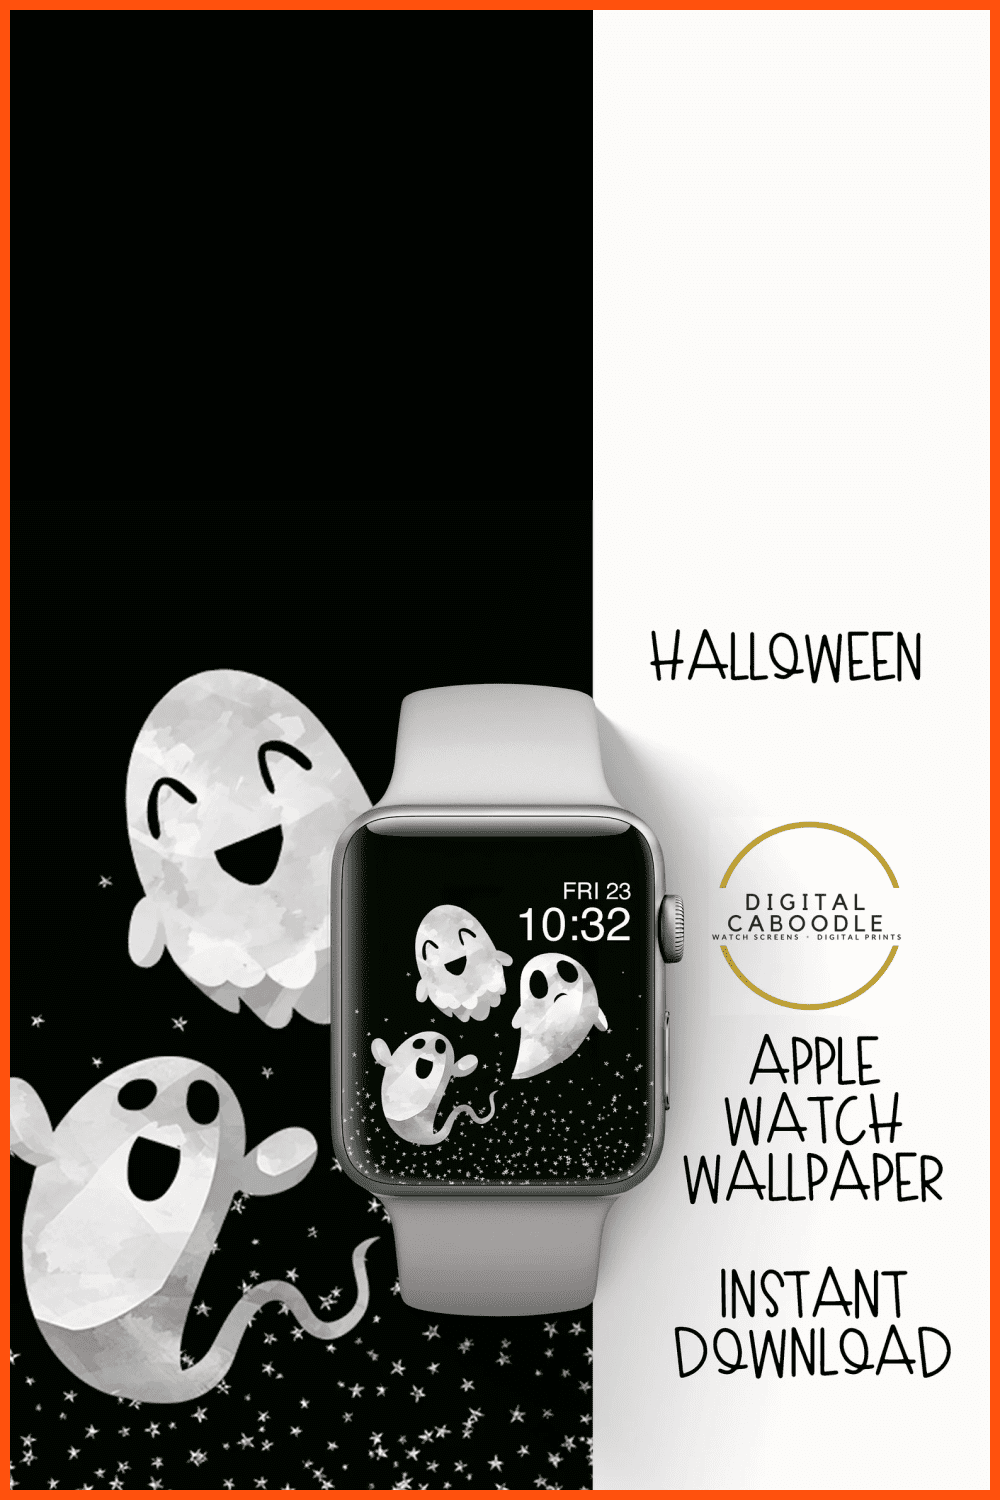 Apple watch with white ghosts on black background.